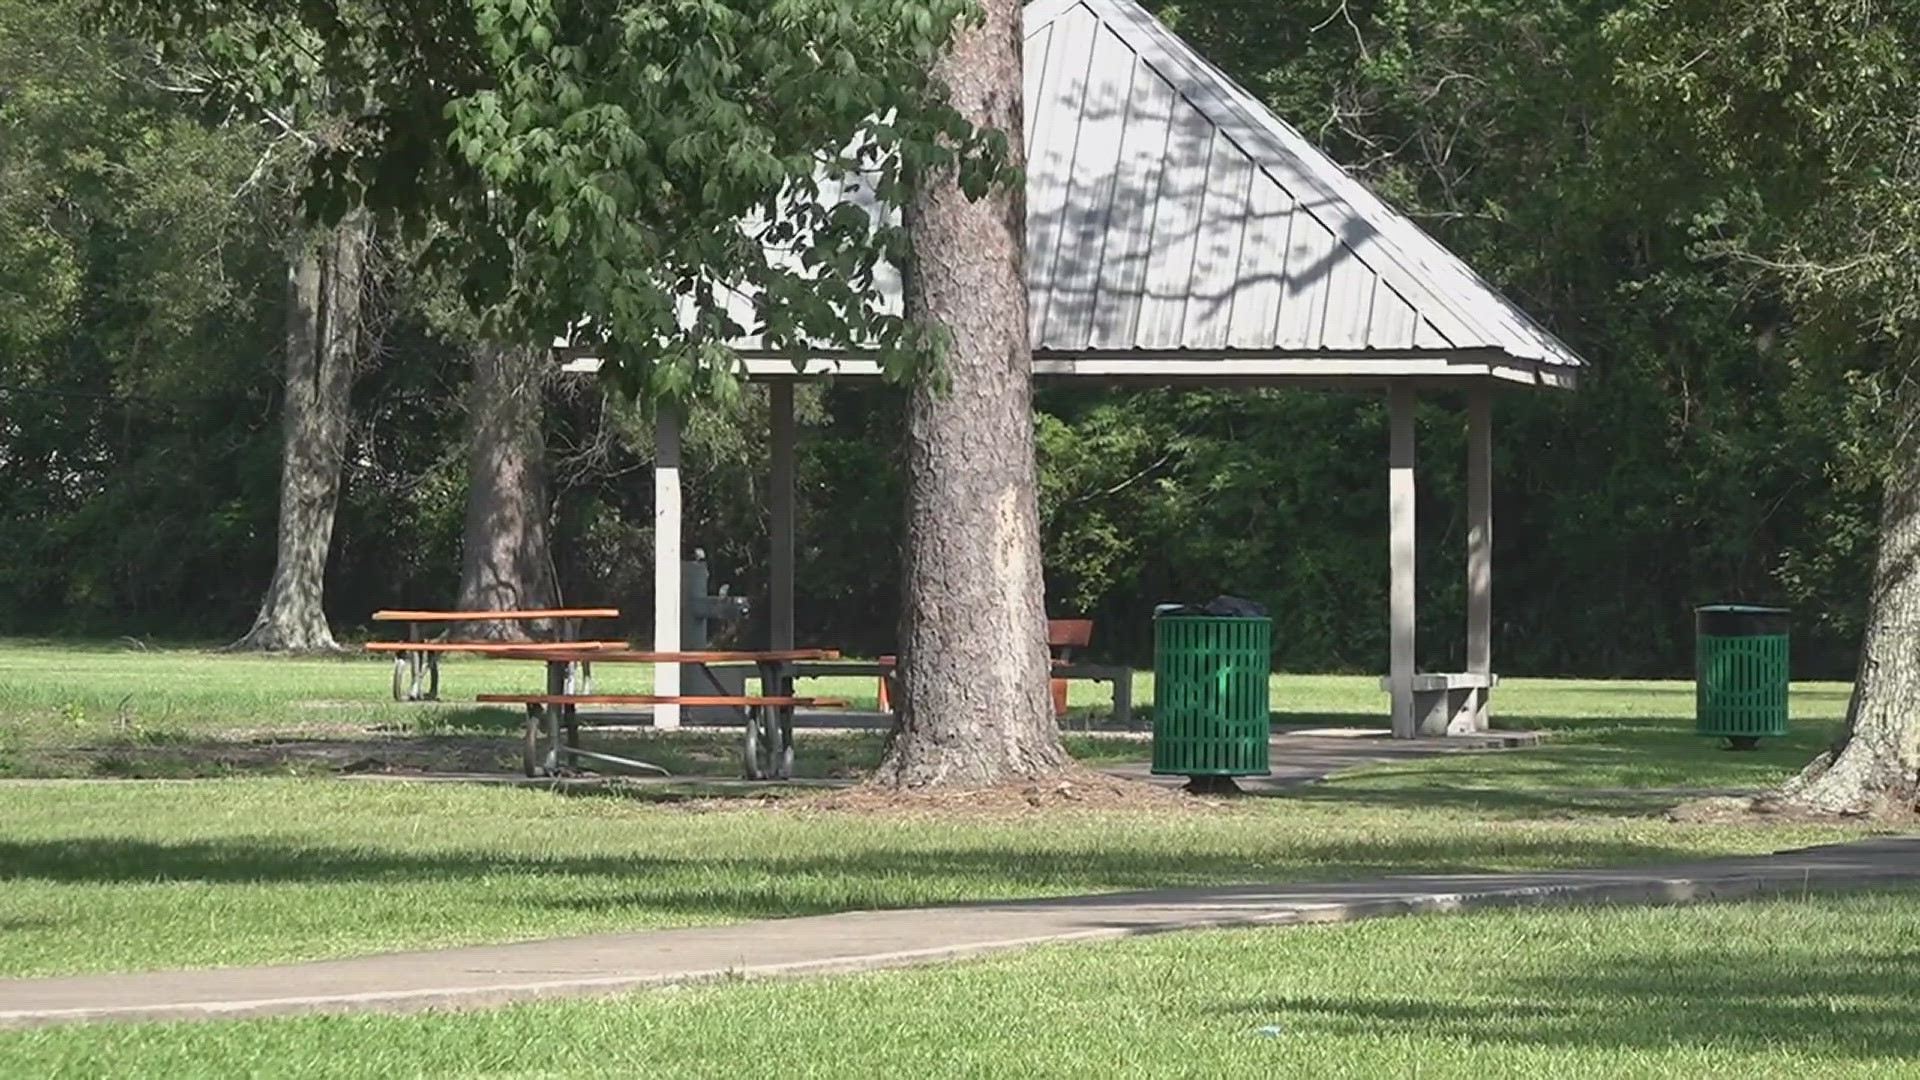 Mayor Roy West says the council wants to take a tour of Combest Park and Babe Zaharias Park before committing any funds for improvements.